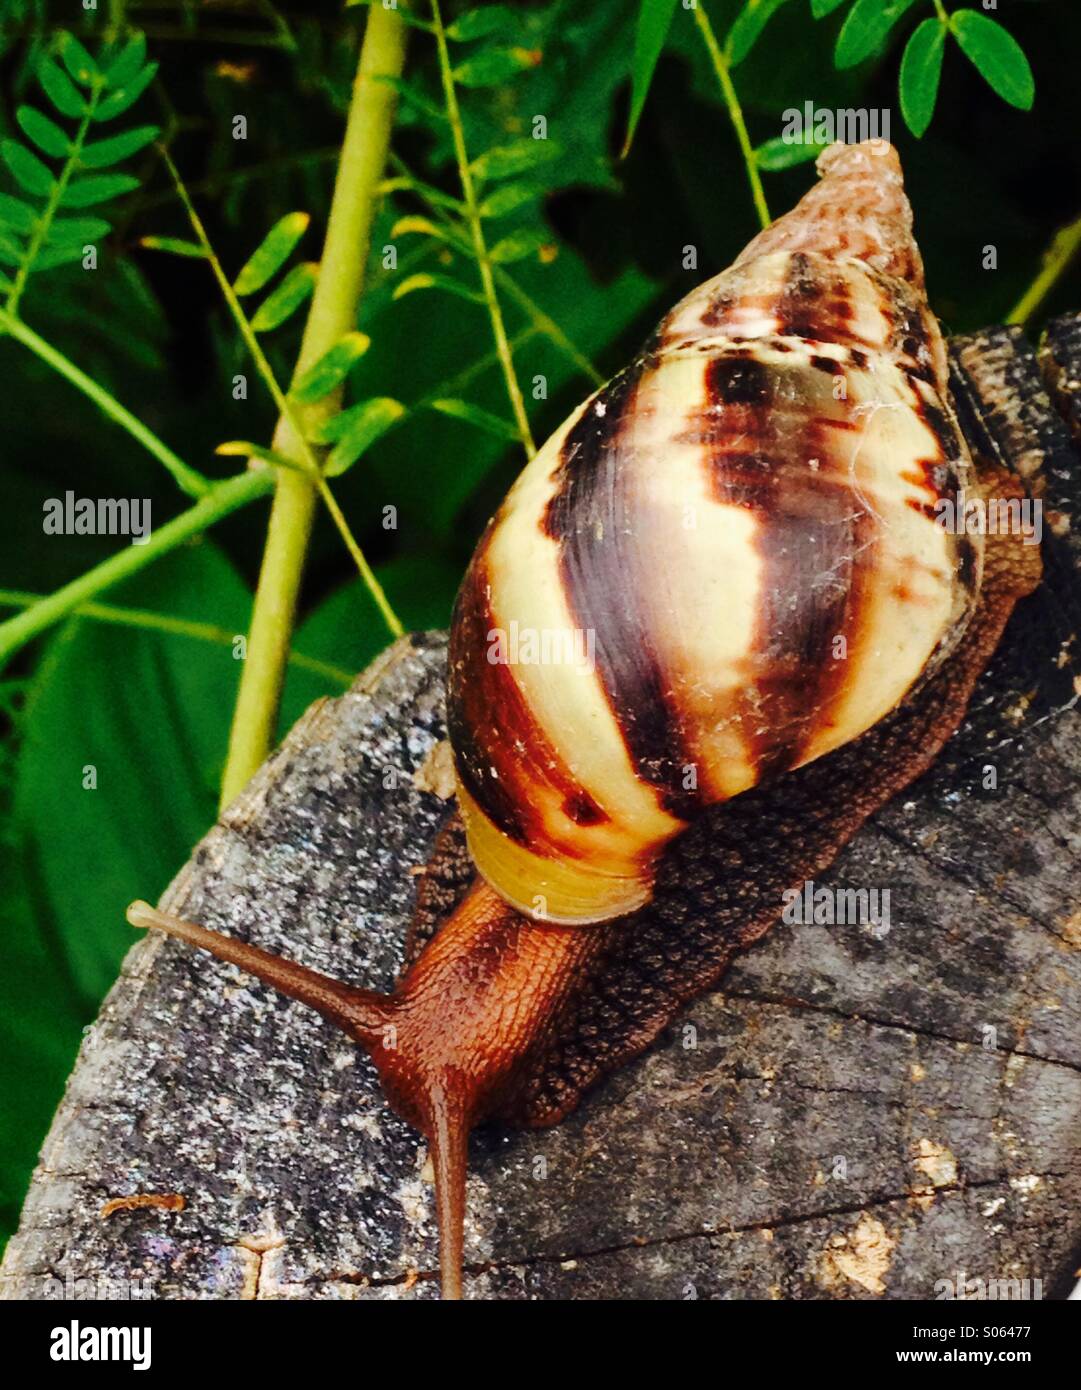 A large, brightly coloured, patterned snail on a green leafy background Stock Photo